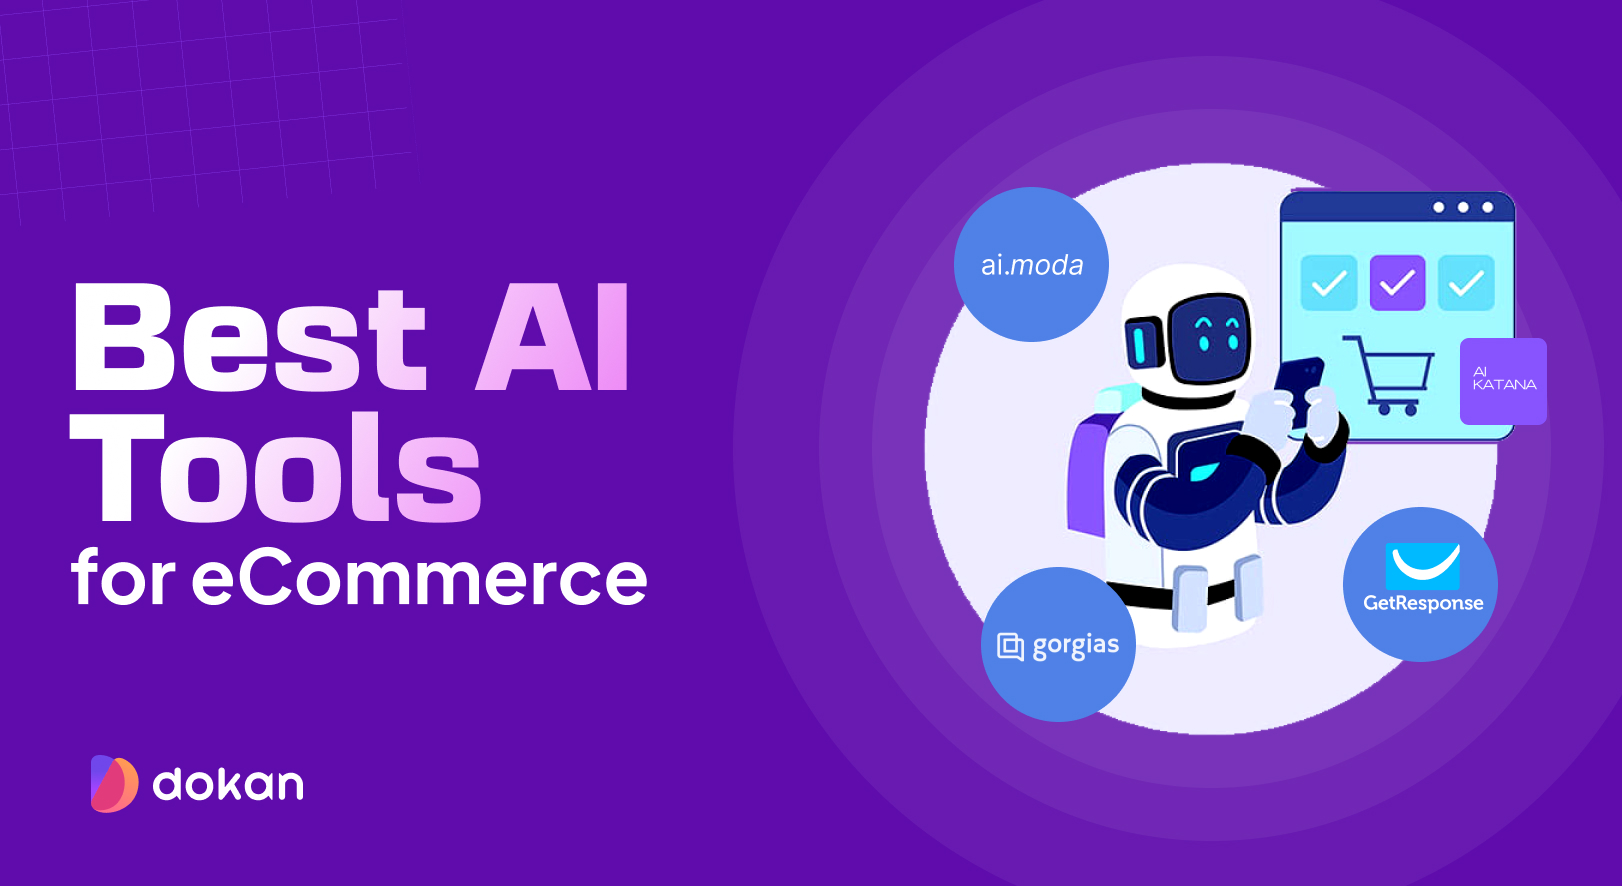 This is the feature image oof the article best AI tools for eCommerce.